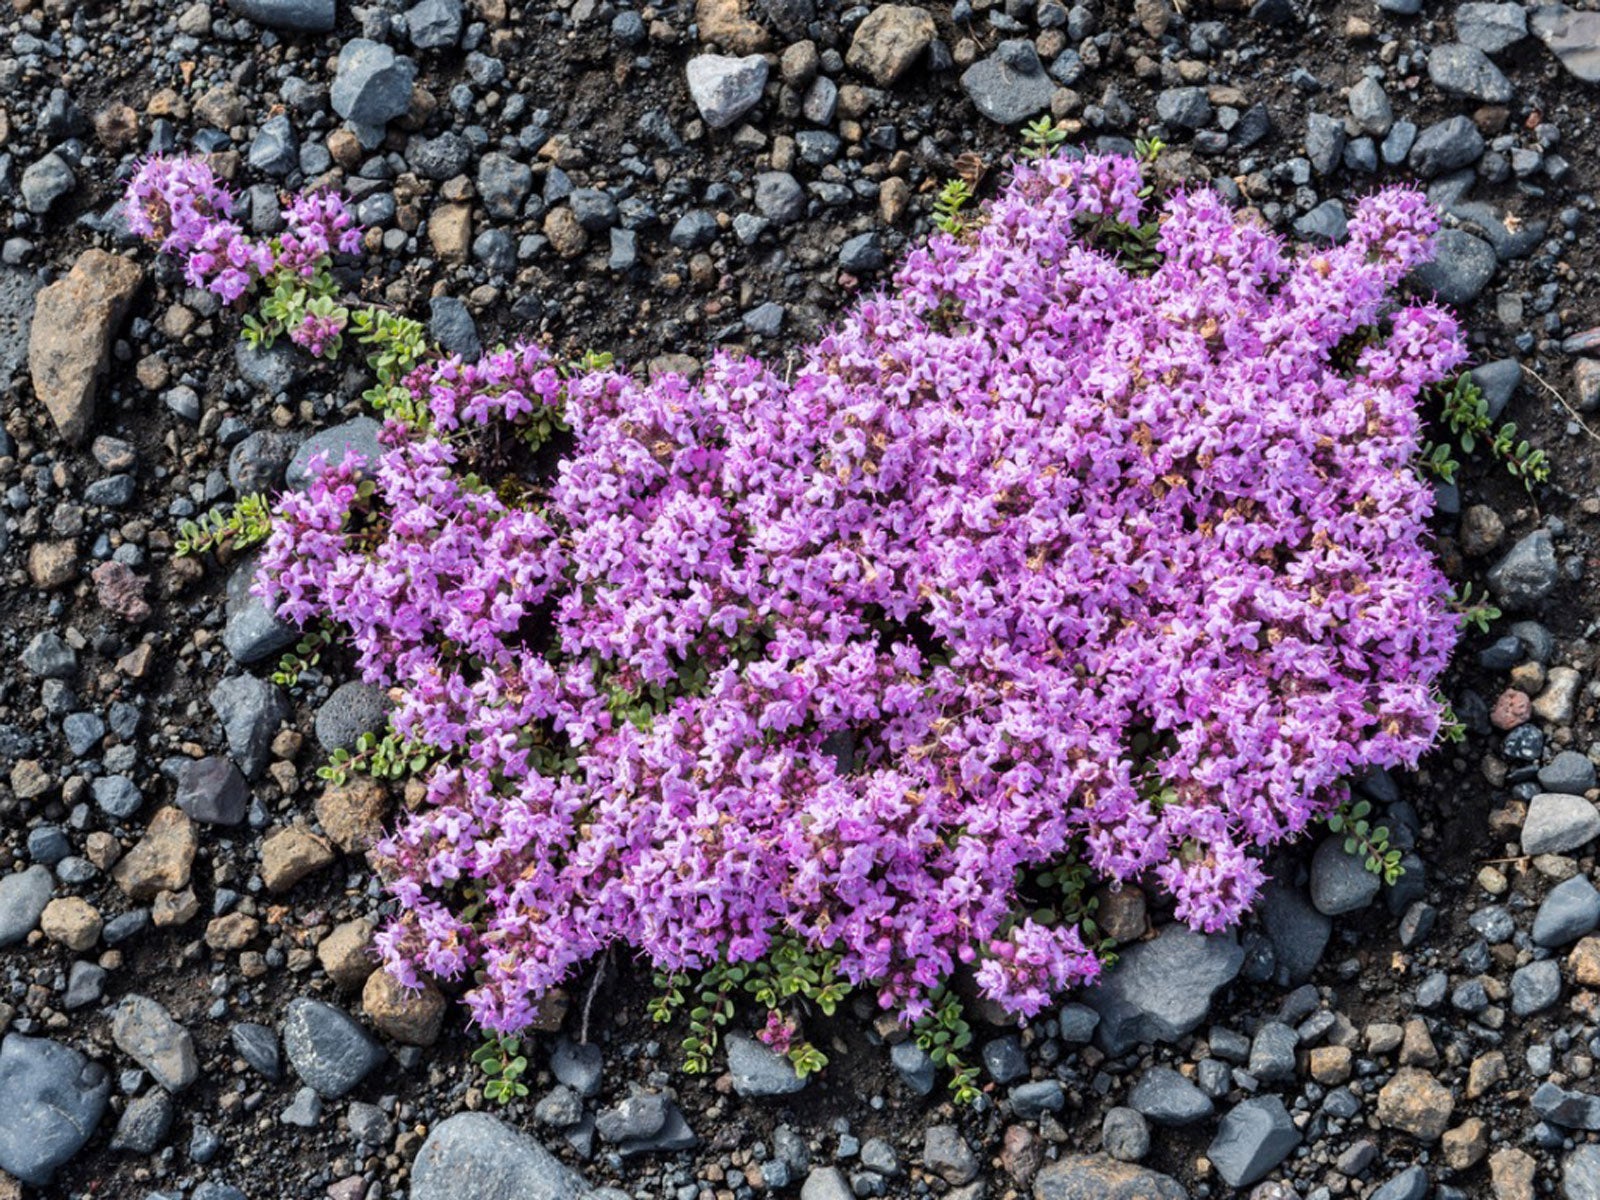 How To Plant Creeping Thyme Ground Cover, Elfin Thyme Ground Cover Seeds